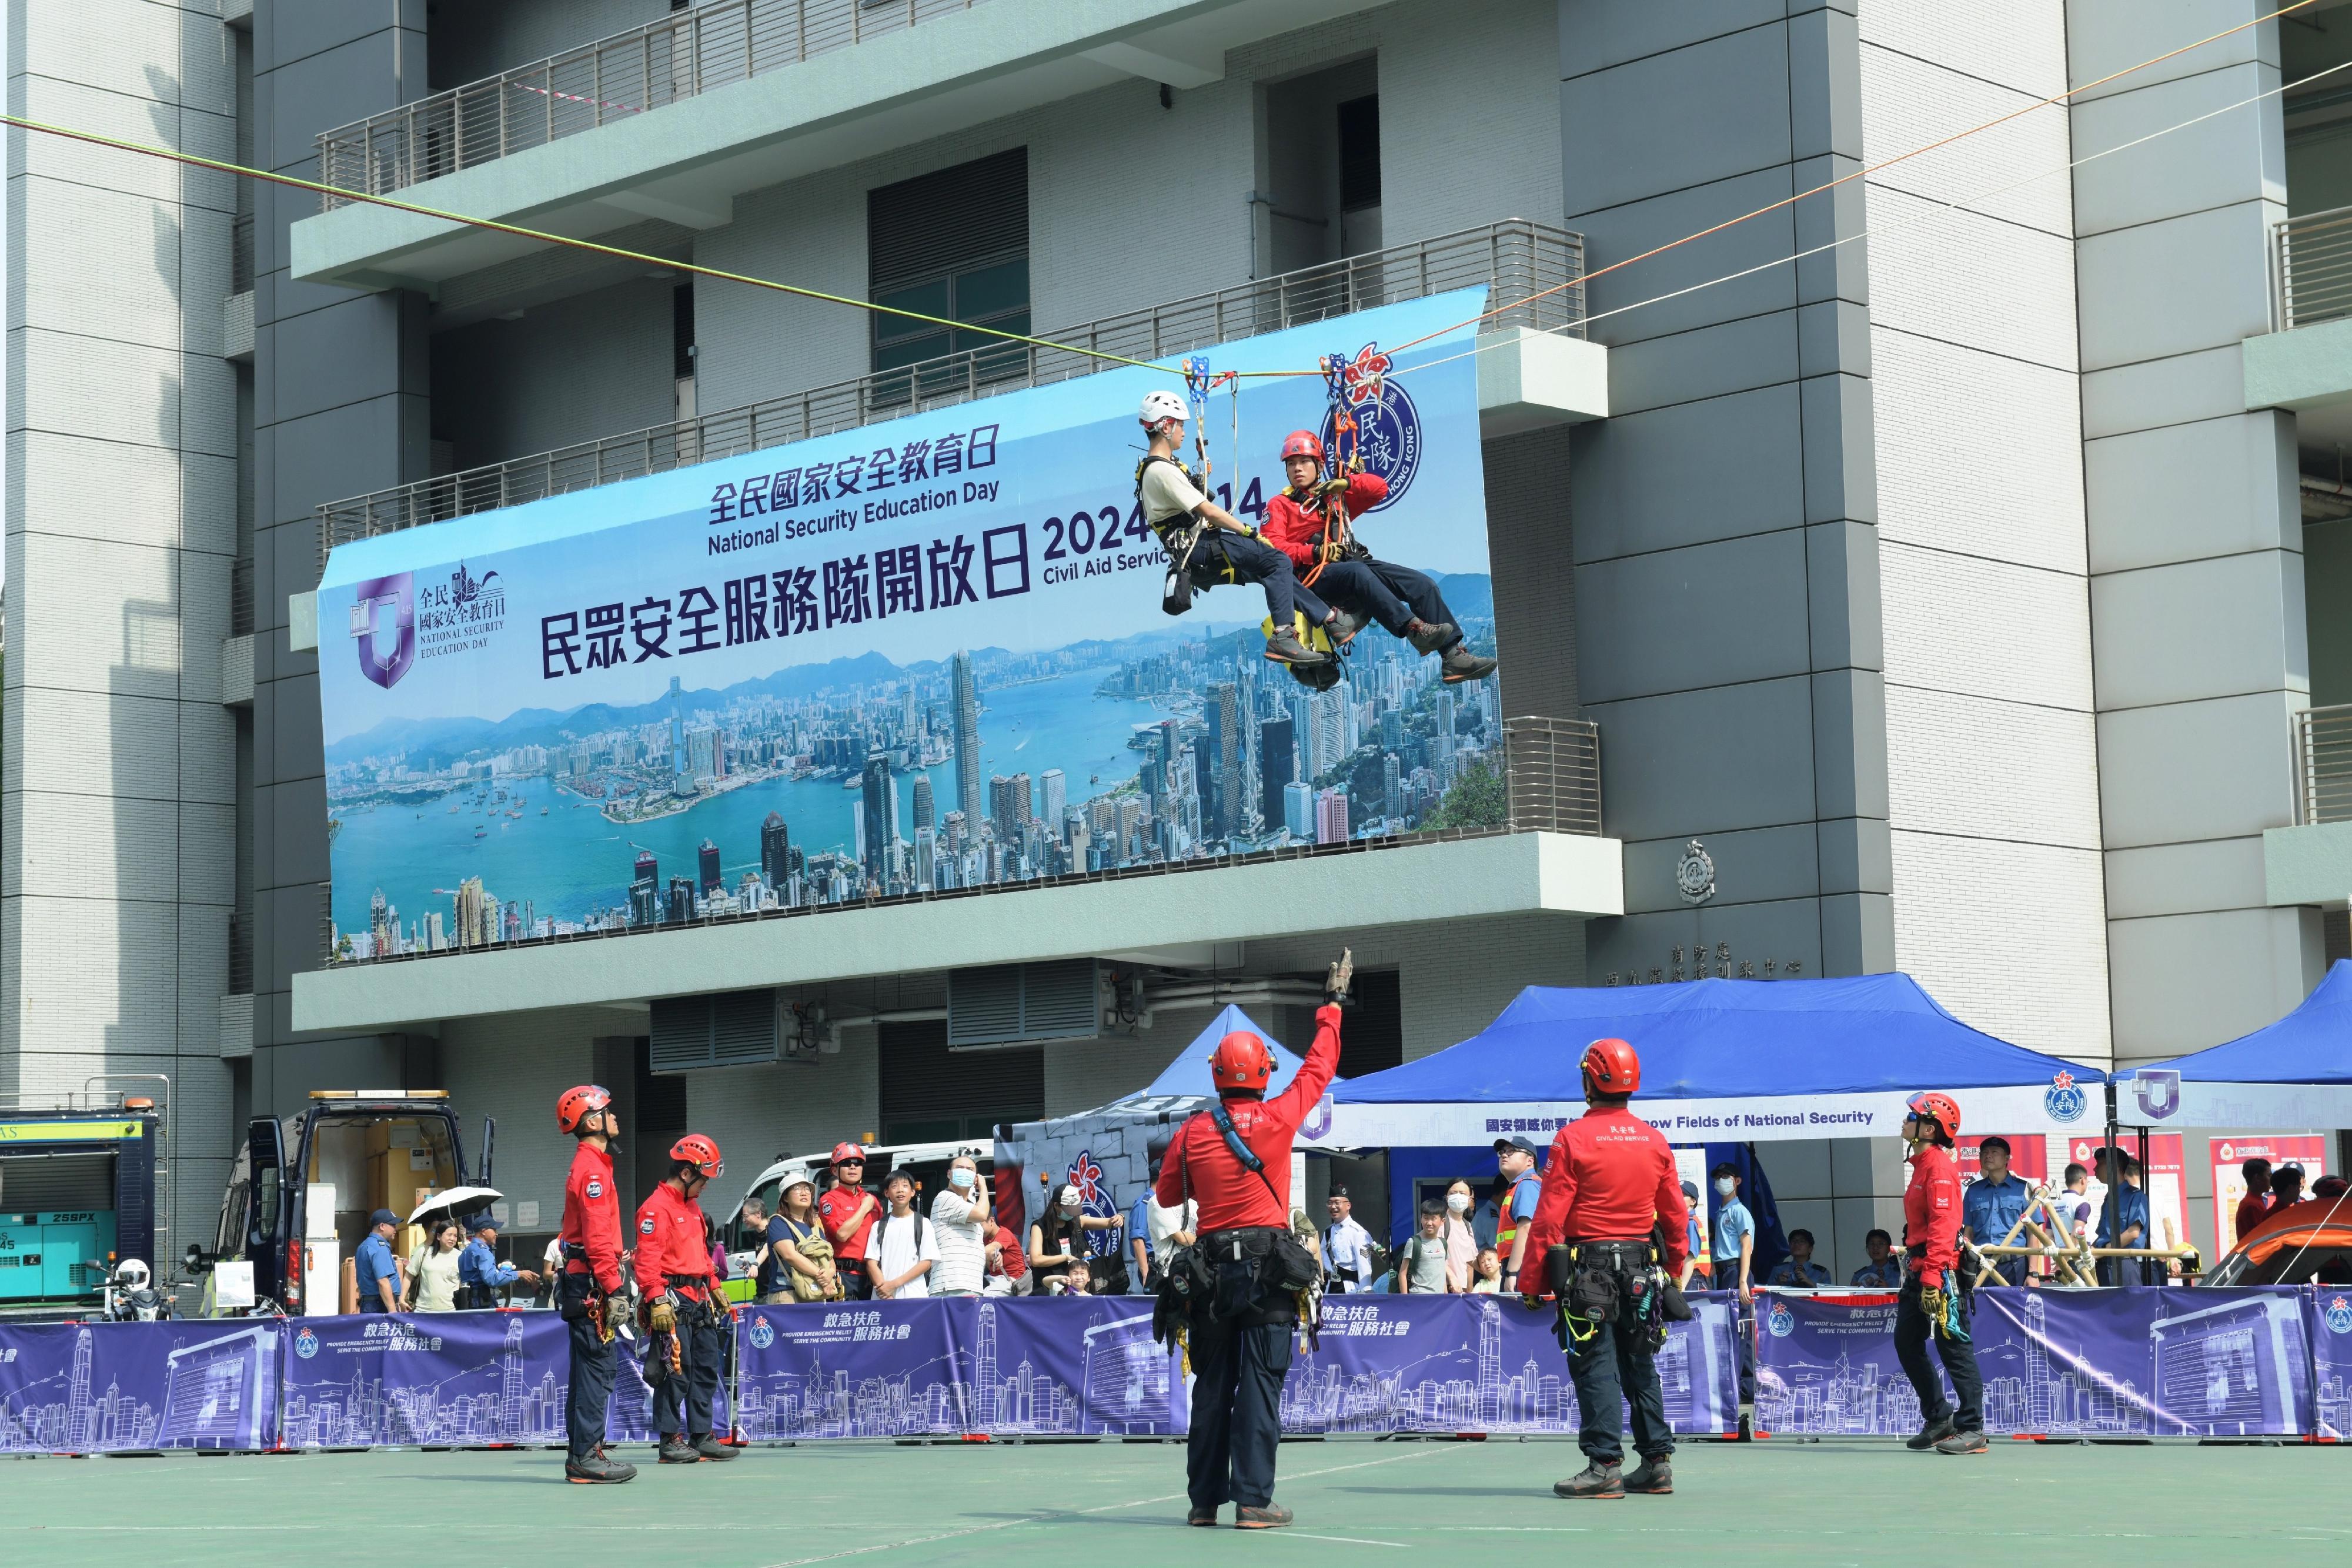 The Civil Aid Service (CAS) held an open day at its headquarters today (April 14) to promote the National Security Education Day. Photo shows CAS members performing a mountain search-and-rescue demonstration.